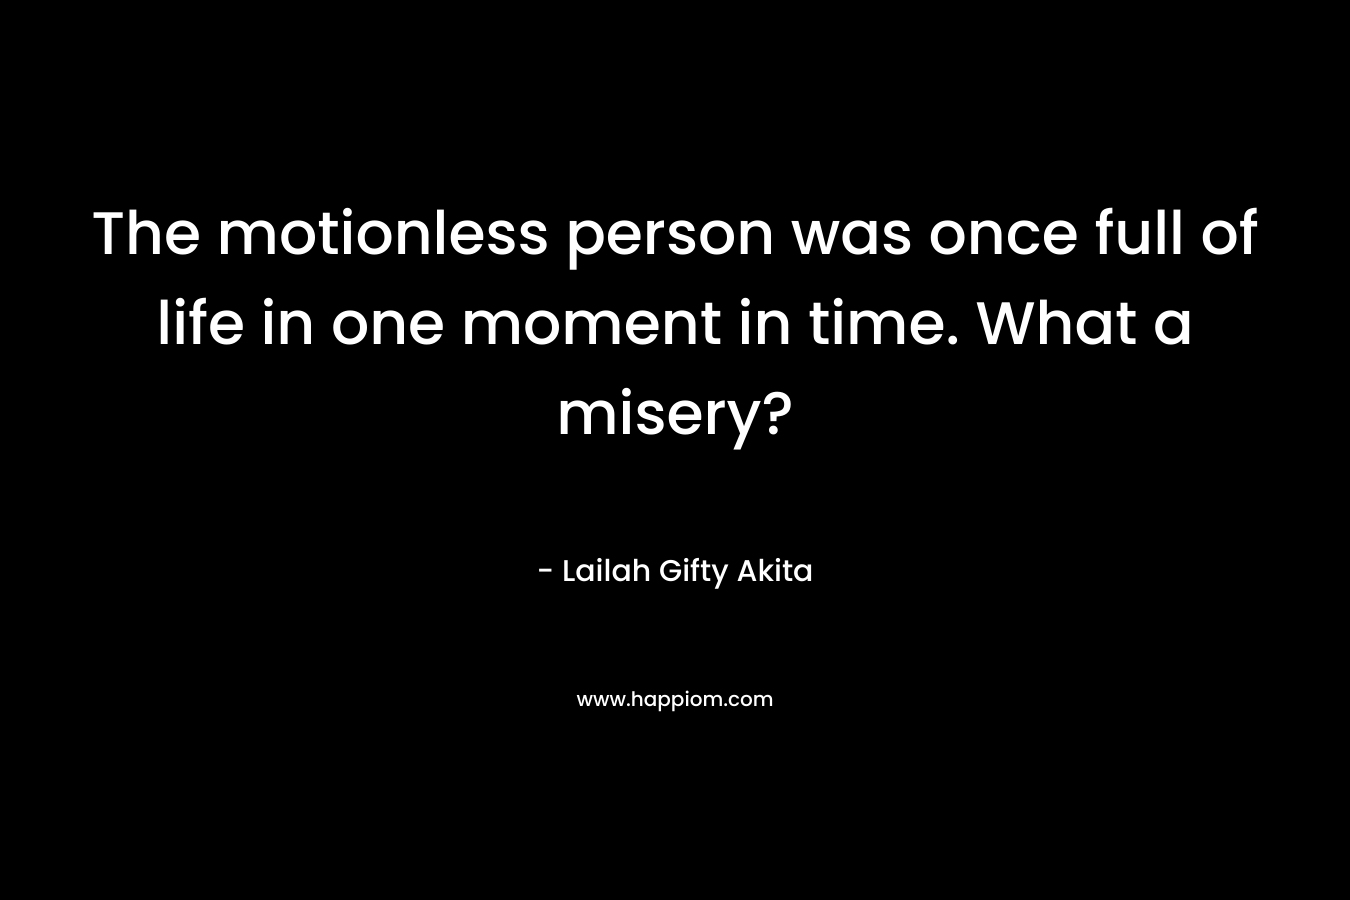 The motionless person was once full of life in one moment in time. What a misery? – Lailah Gifty Akita